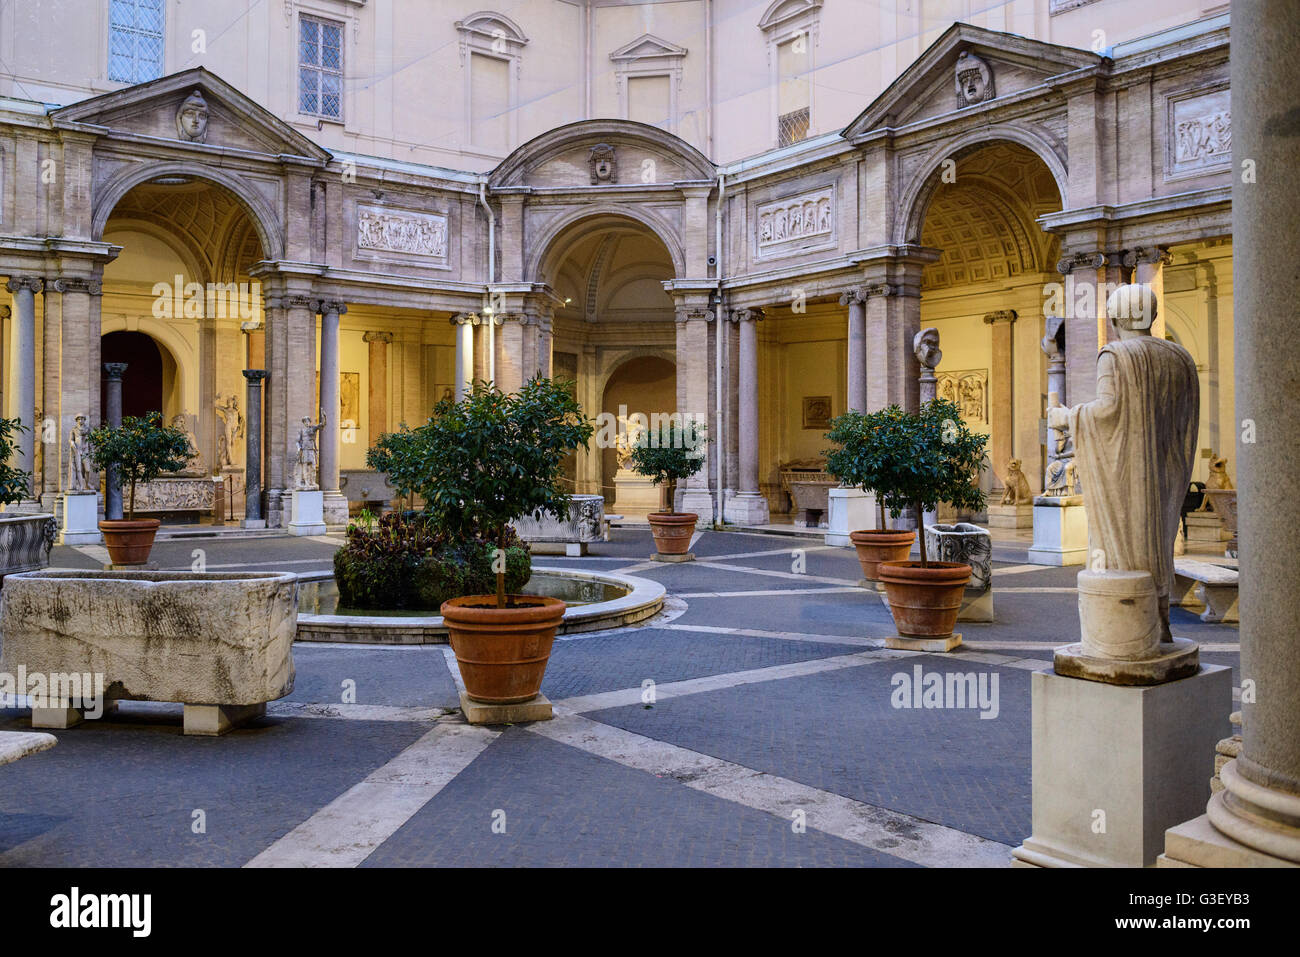 Rome. Italy. Cortile Ottagono, inner courtyard of the Belvedere Palace, Museo Pio-Clementino, Vatican Museums. Stock Photo